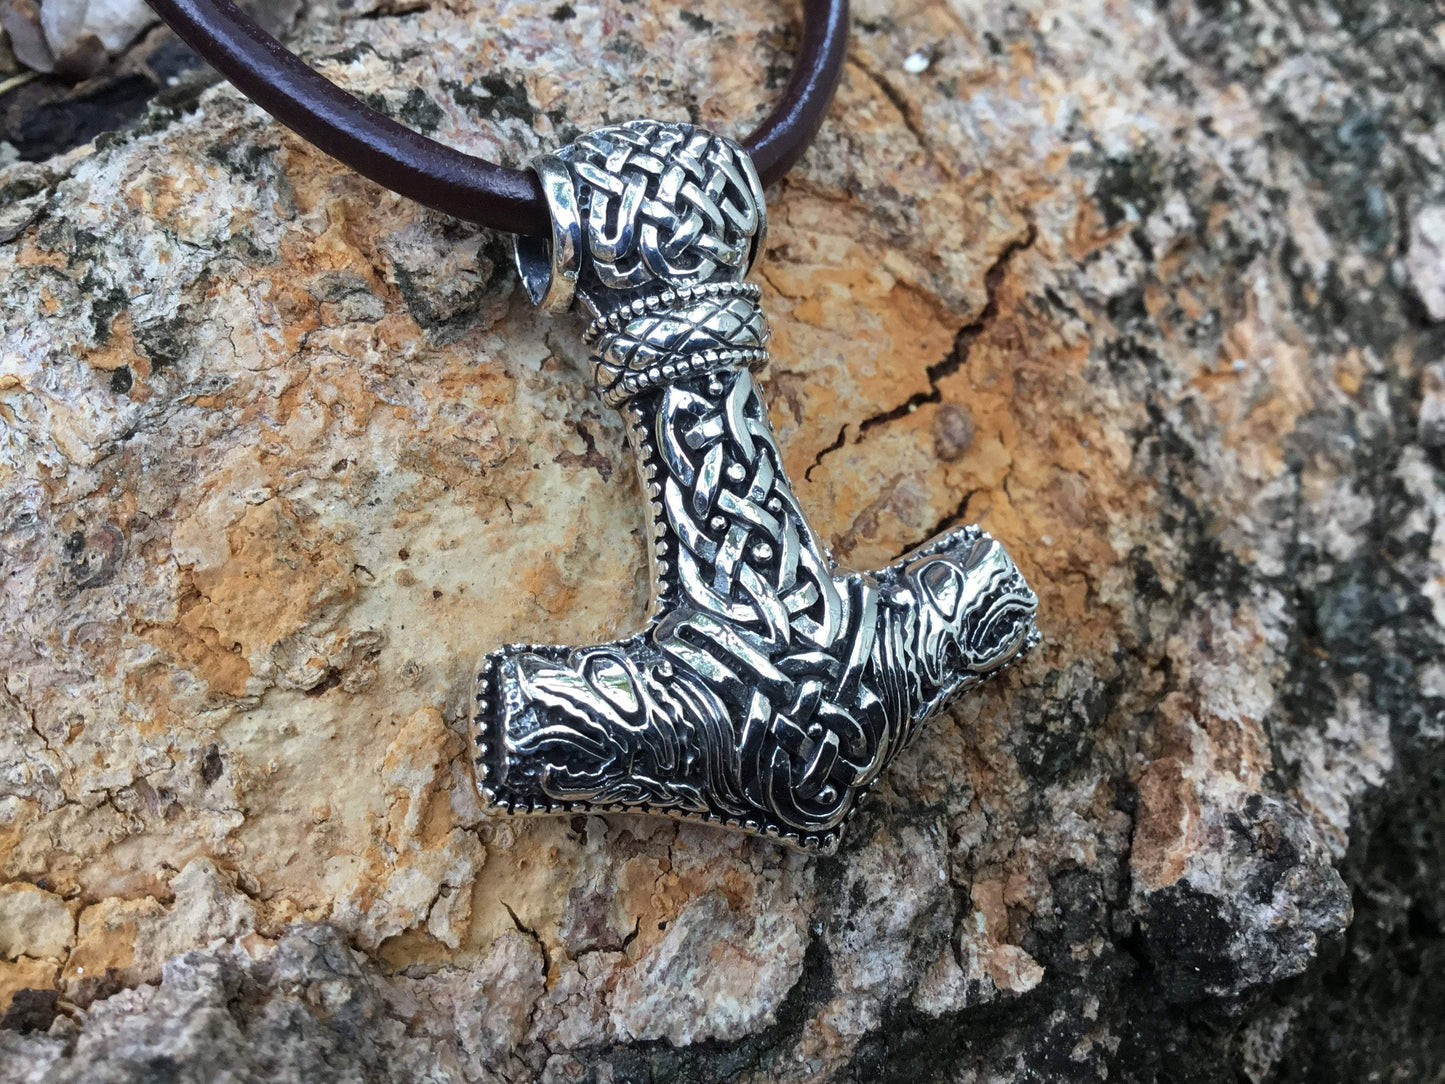 Sterling Silver Mjolnir Pendant with Jormungand Heads - SilverMania925